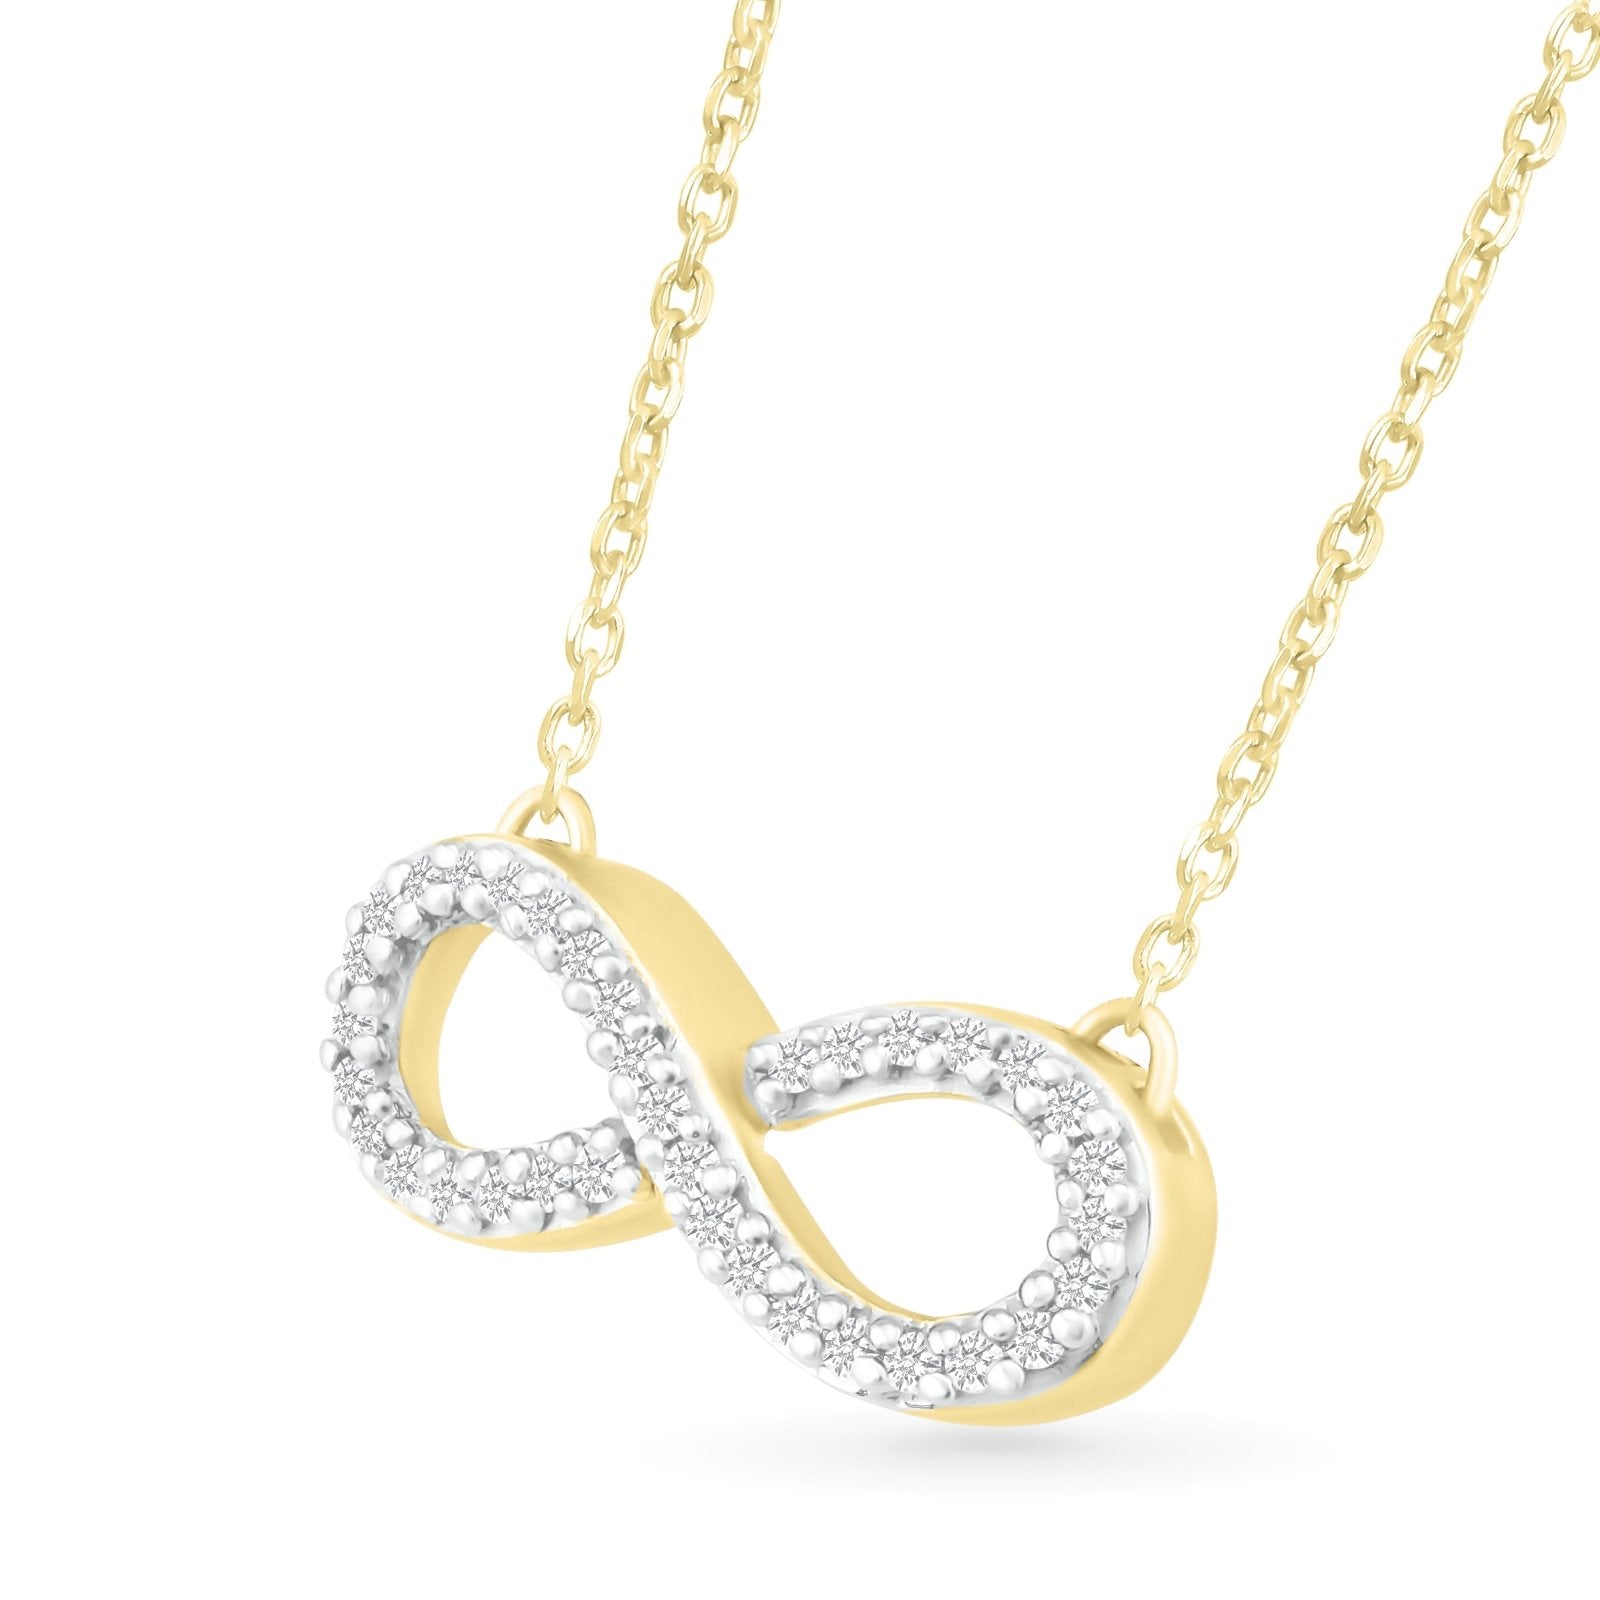 Infinity Pendant Necklace in Diamond Pave Necklaces Estella Collection #product_description# 32693 Diamond Made to Order Pendant Necklace #tag4# #tag5# #tag6# #tag7# #tag8# #tag9# #tag10#